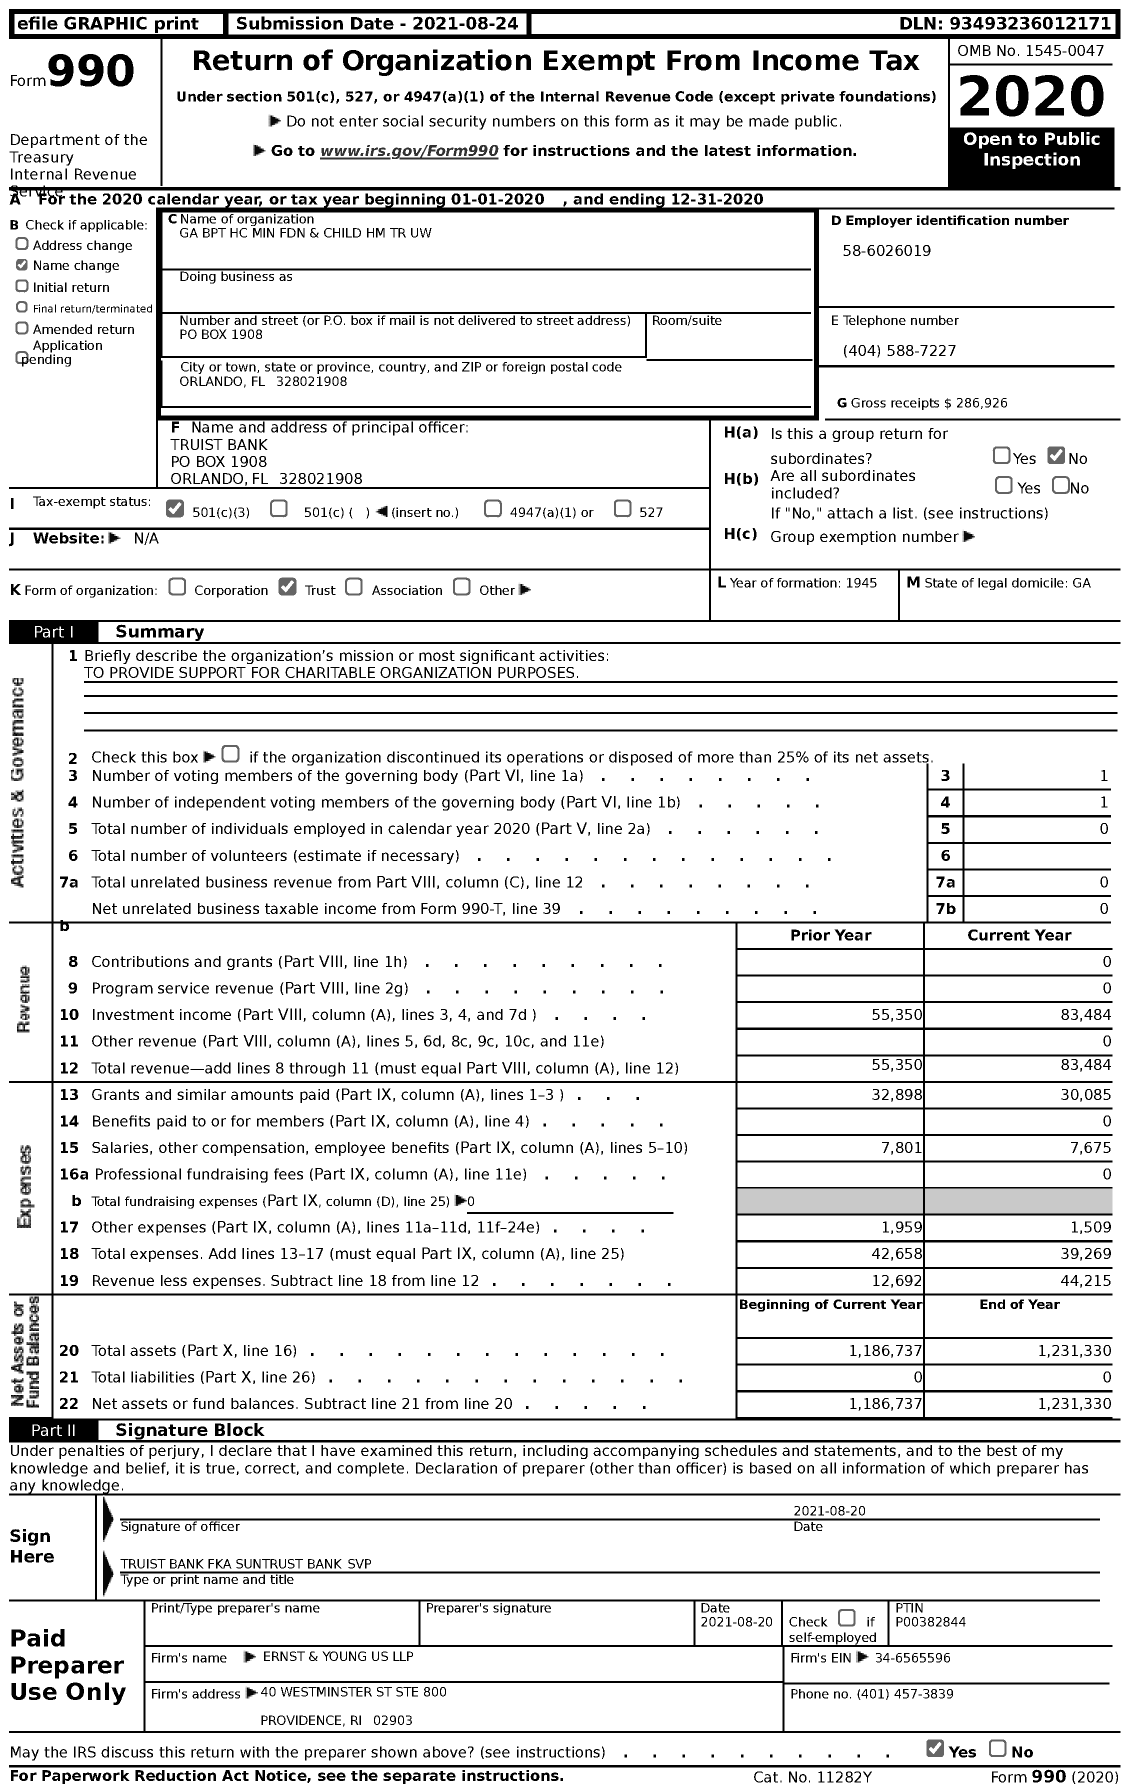 Image of first page of 2020 Form 990 for Ga BPT HC Min Foundation and Child HM TR Uw